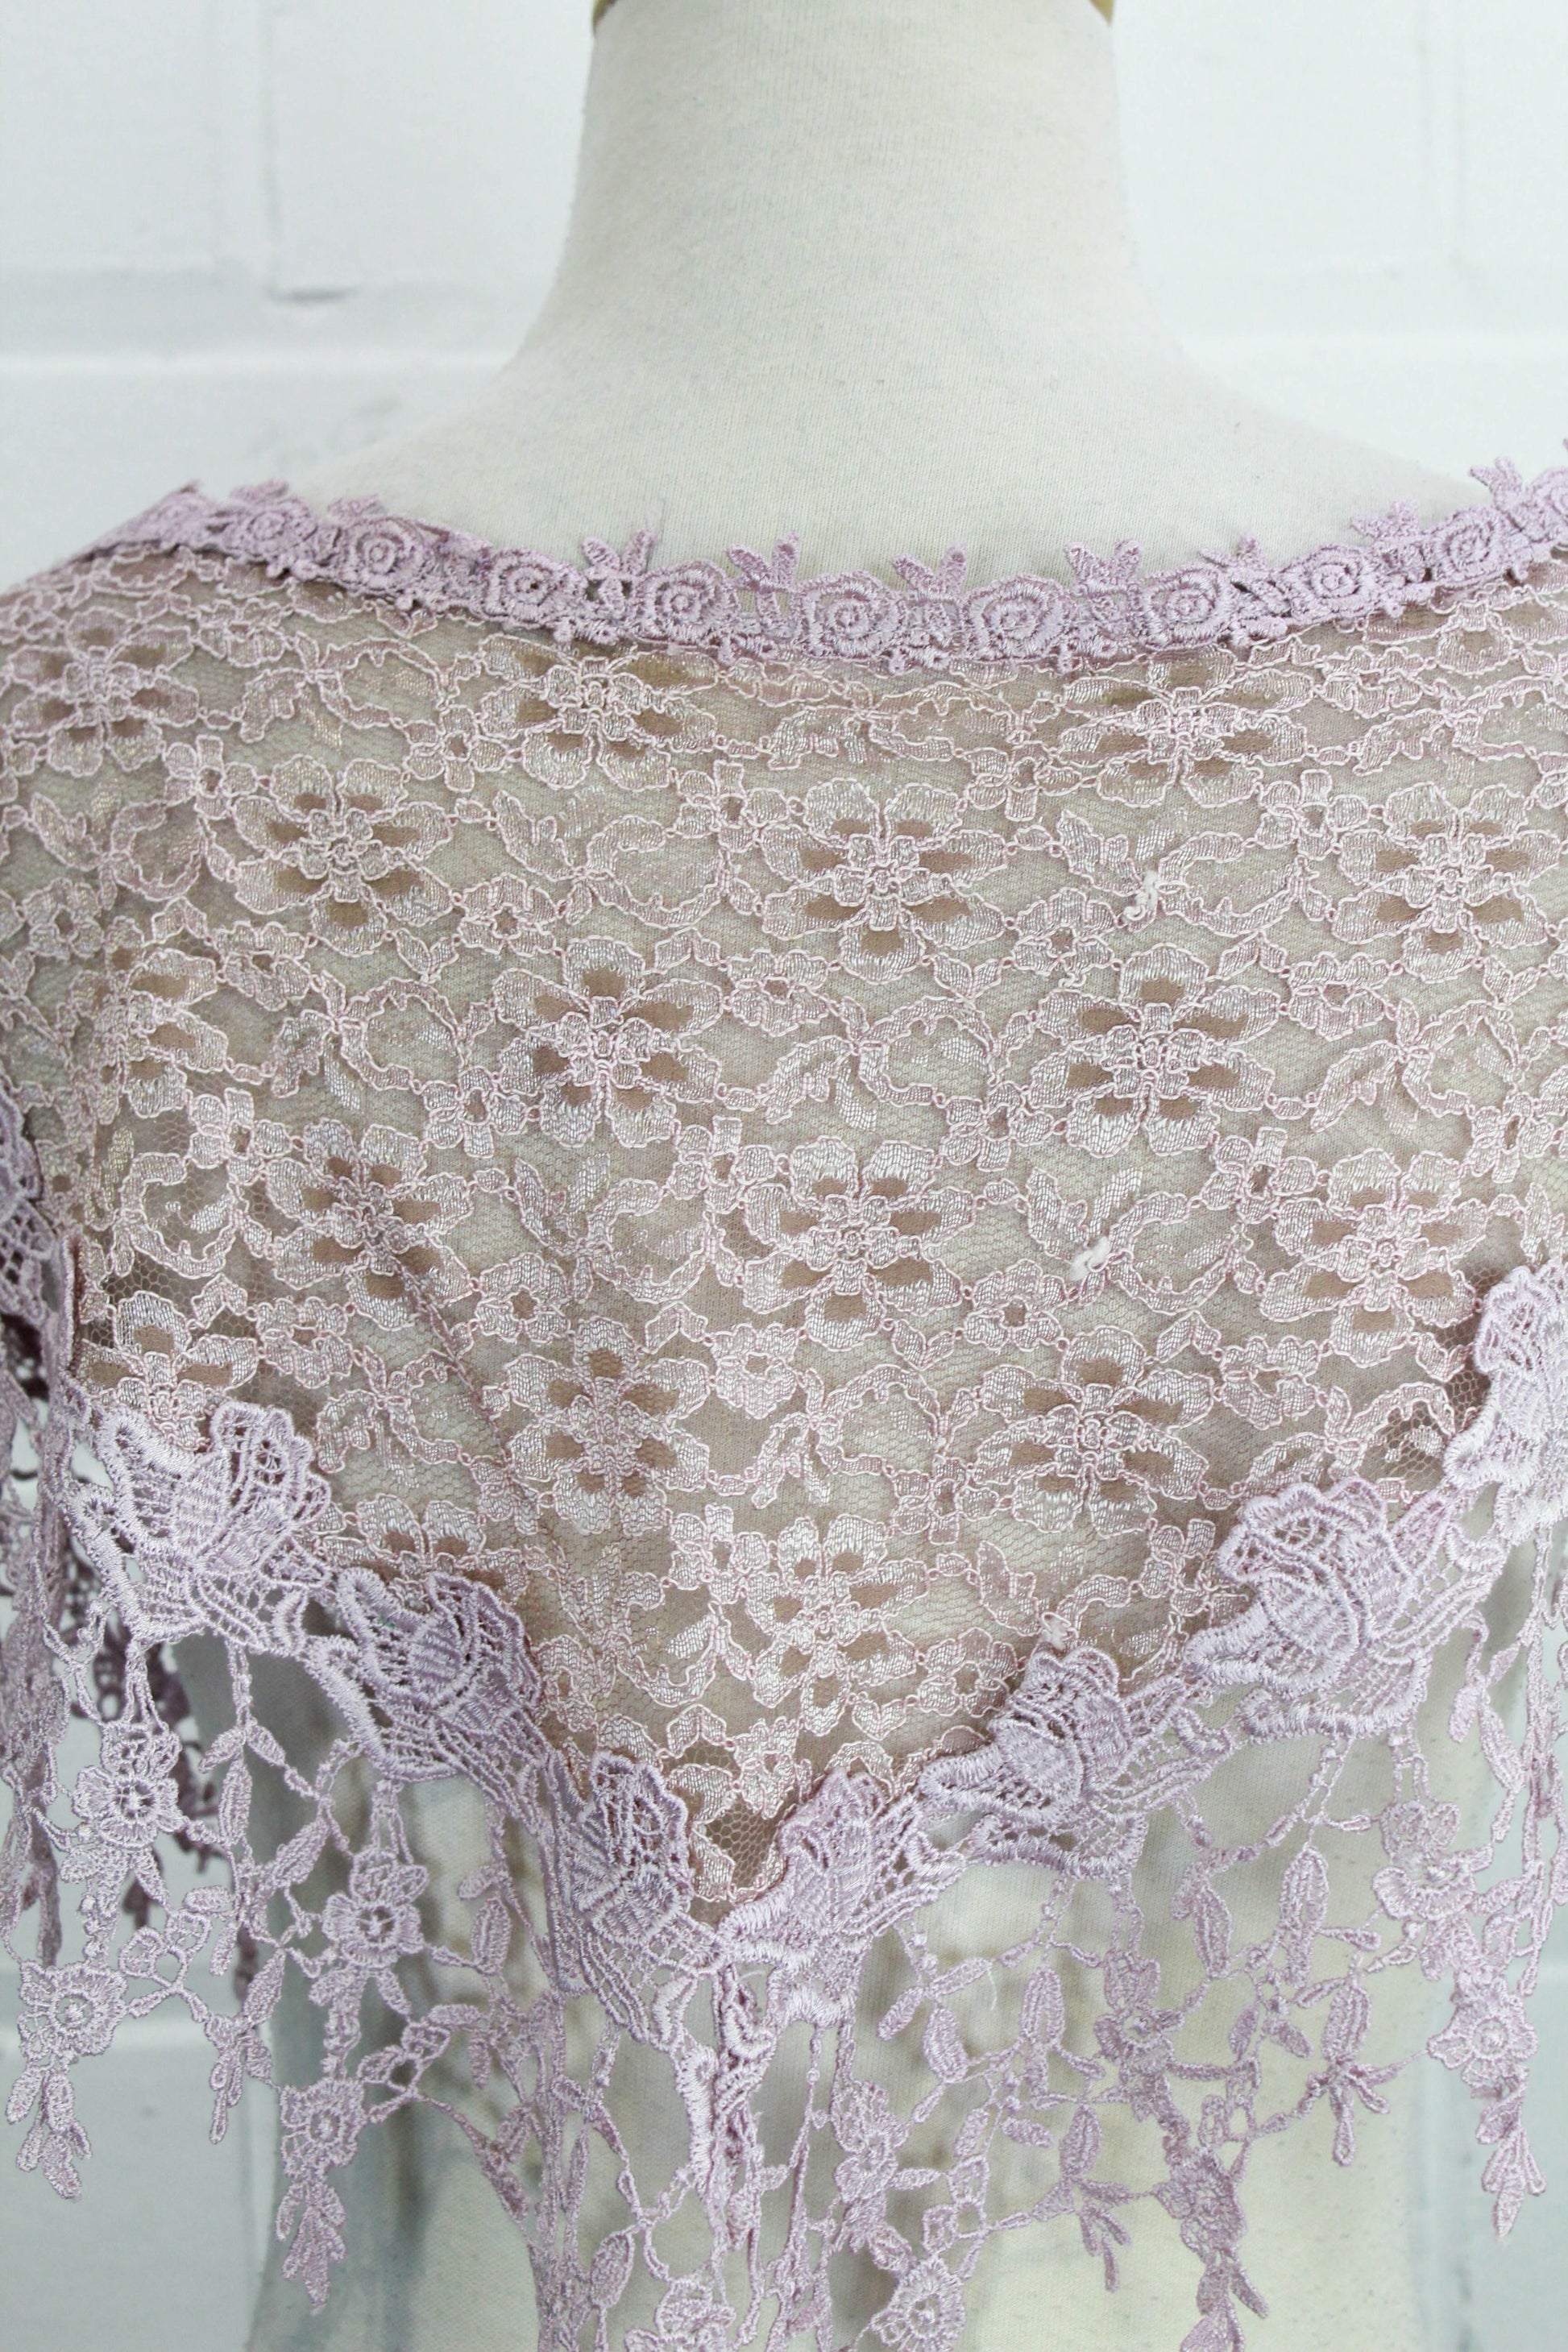 Mauve Lace Victorian Style Shawl Back View